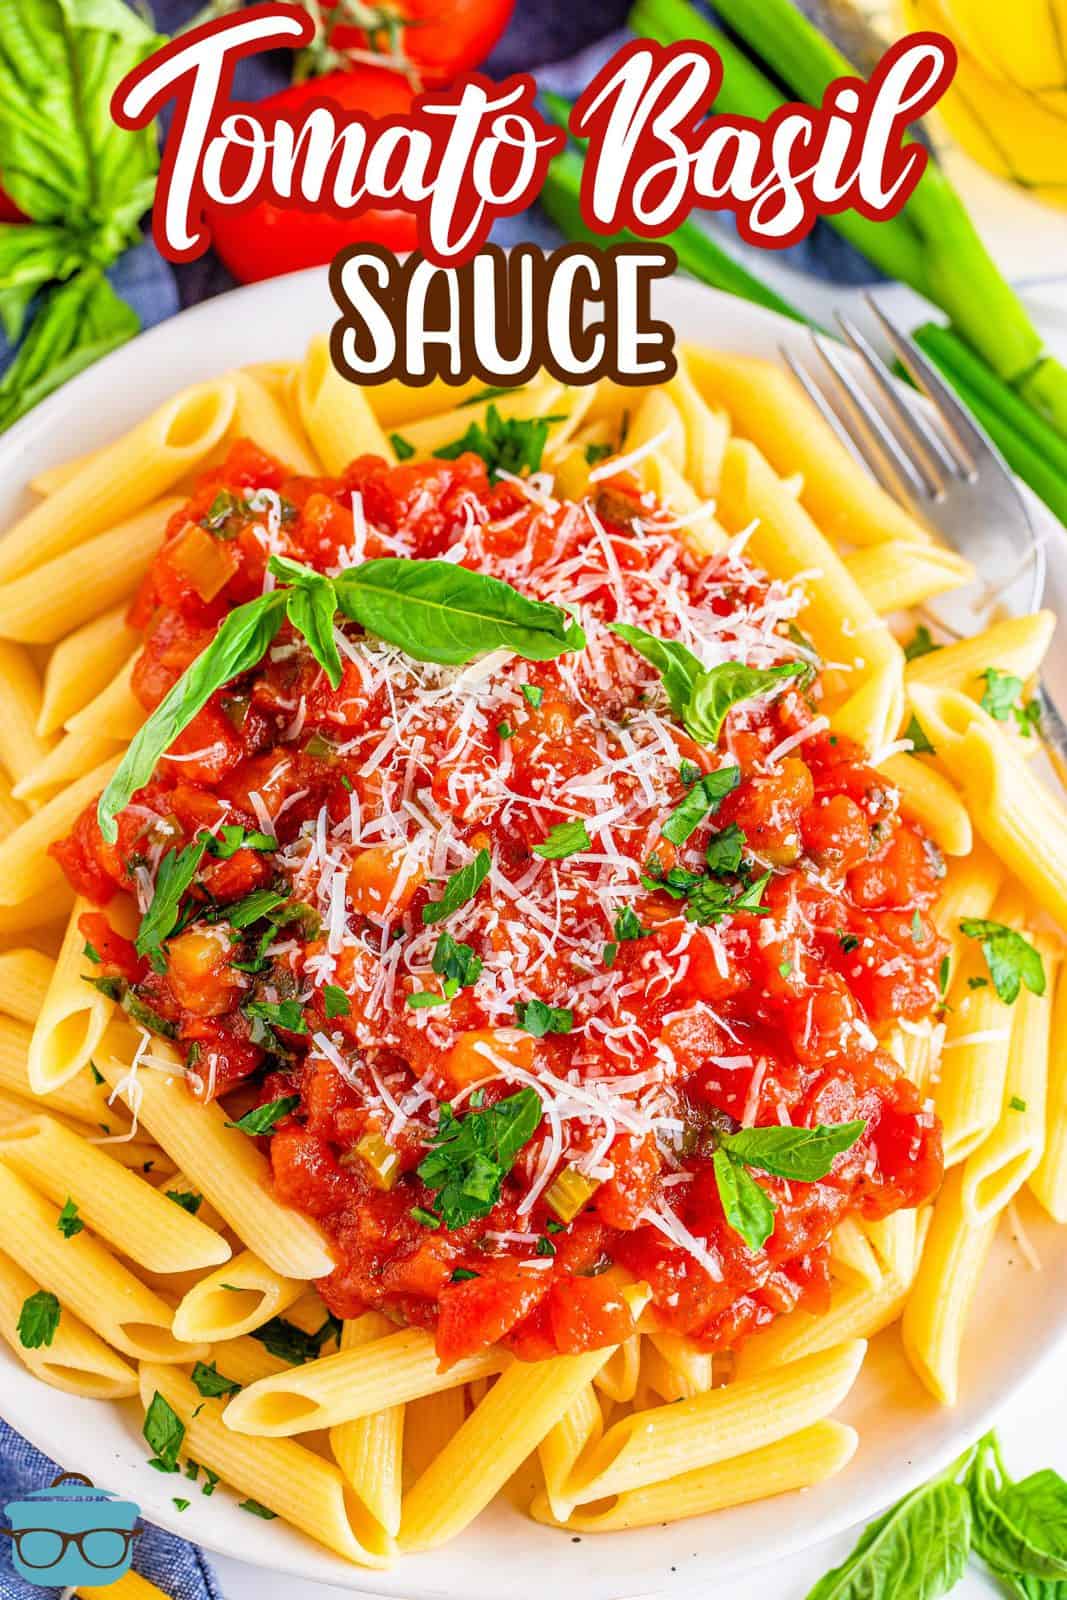 Pinterest image of Easy Tomato Basil Sauce over pasta garnished with basil leaves.